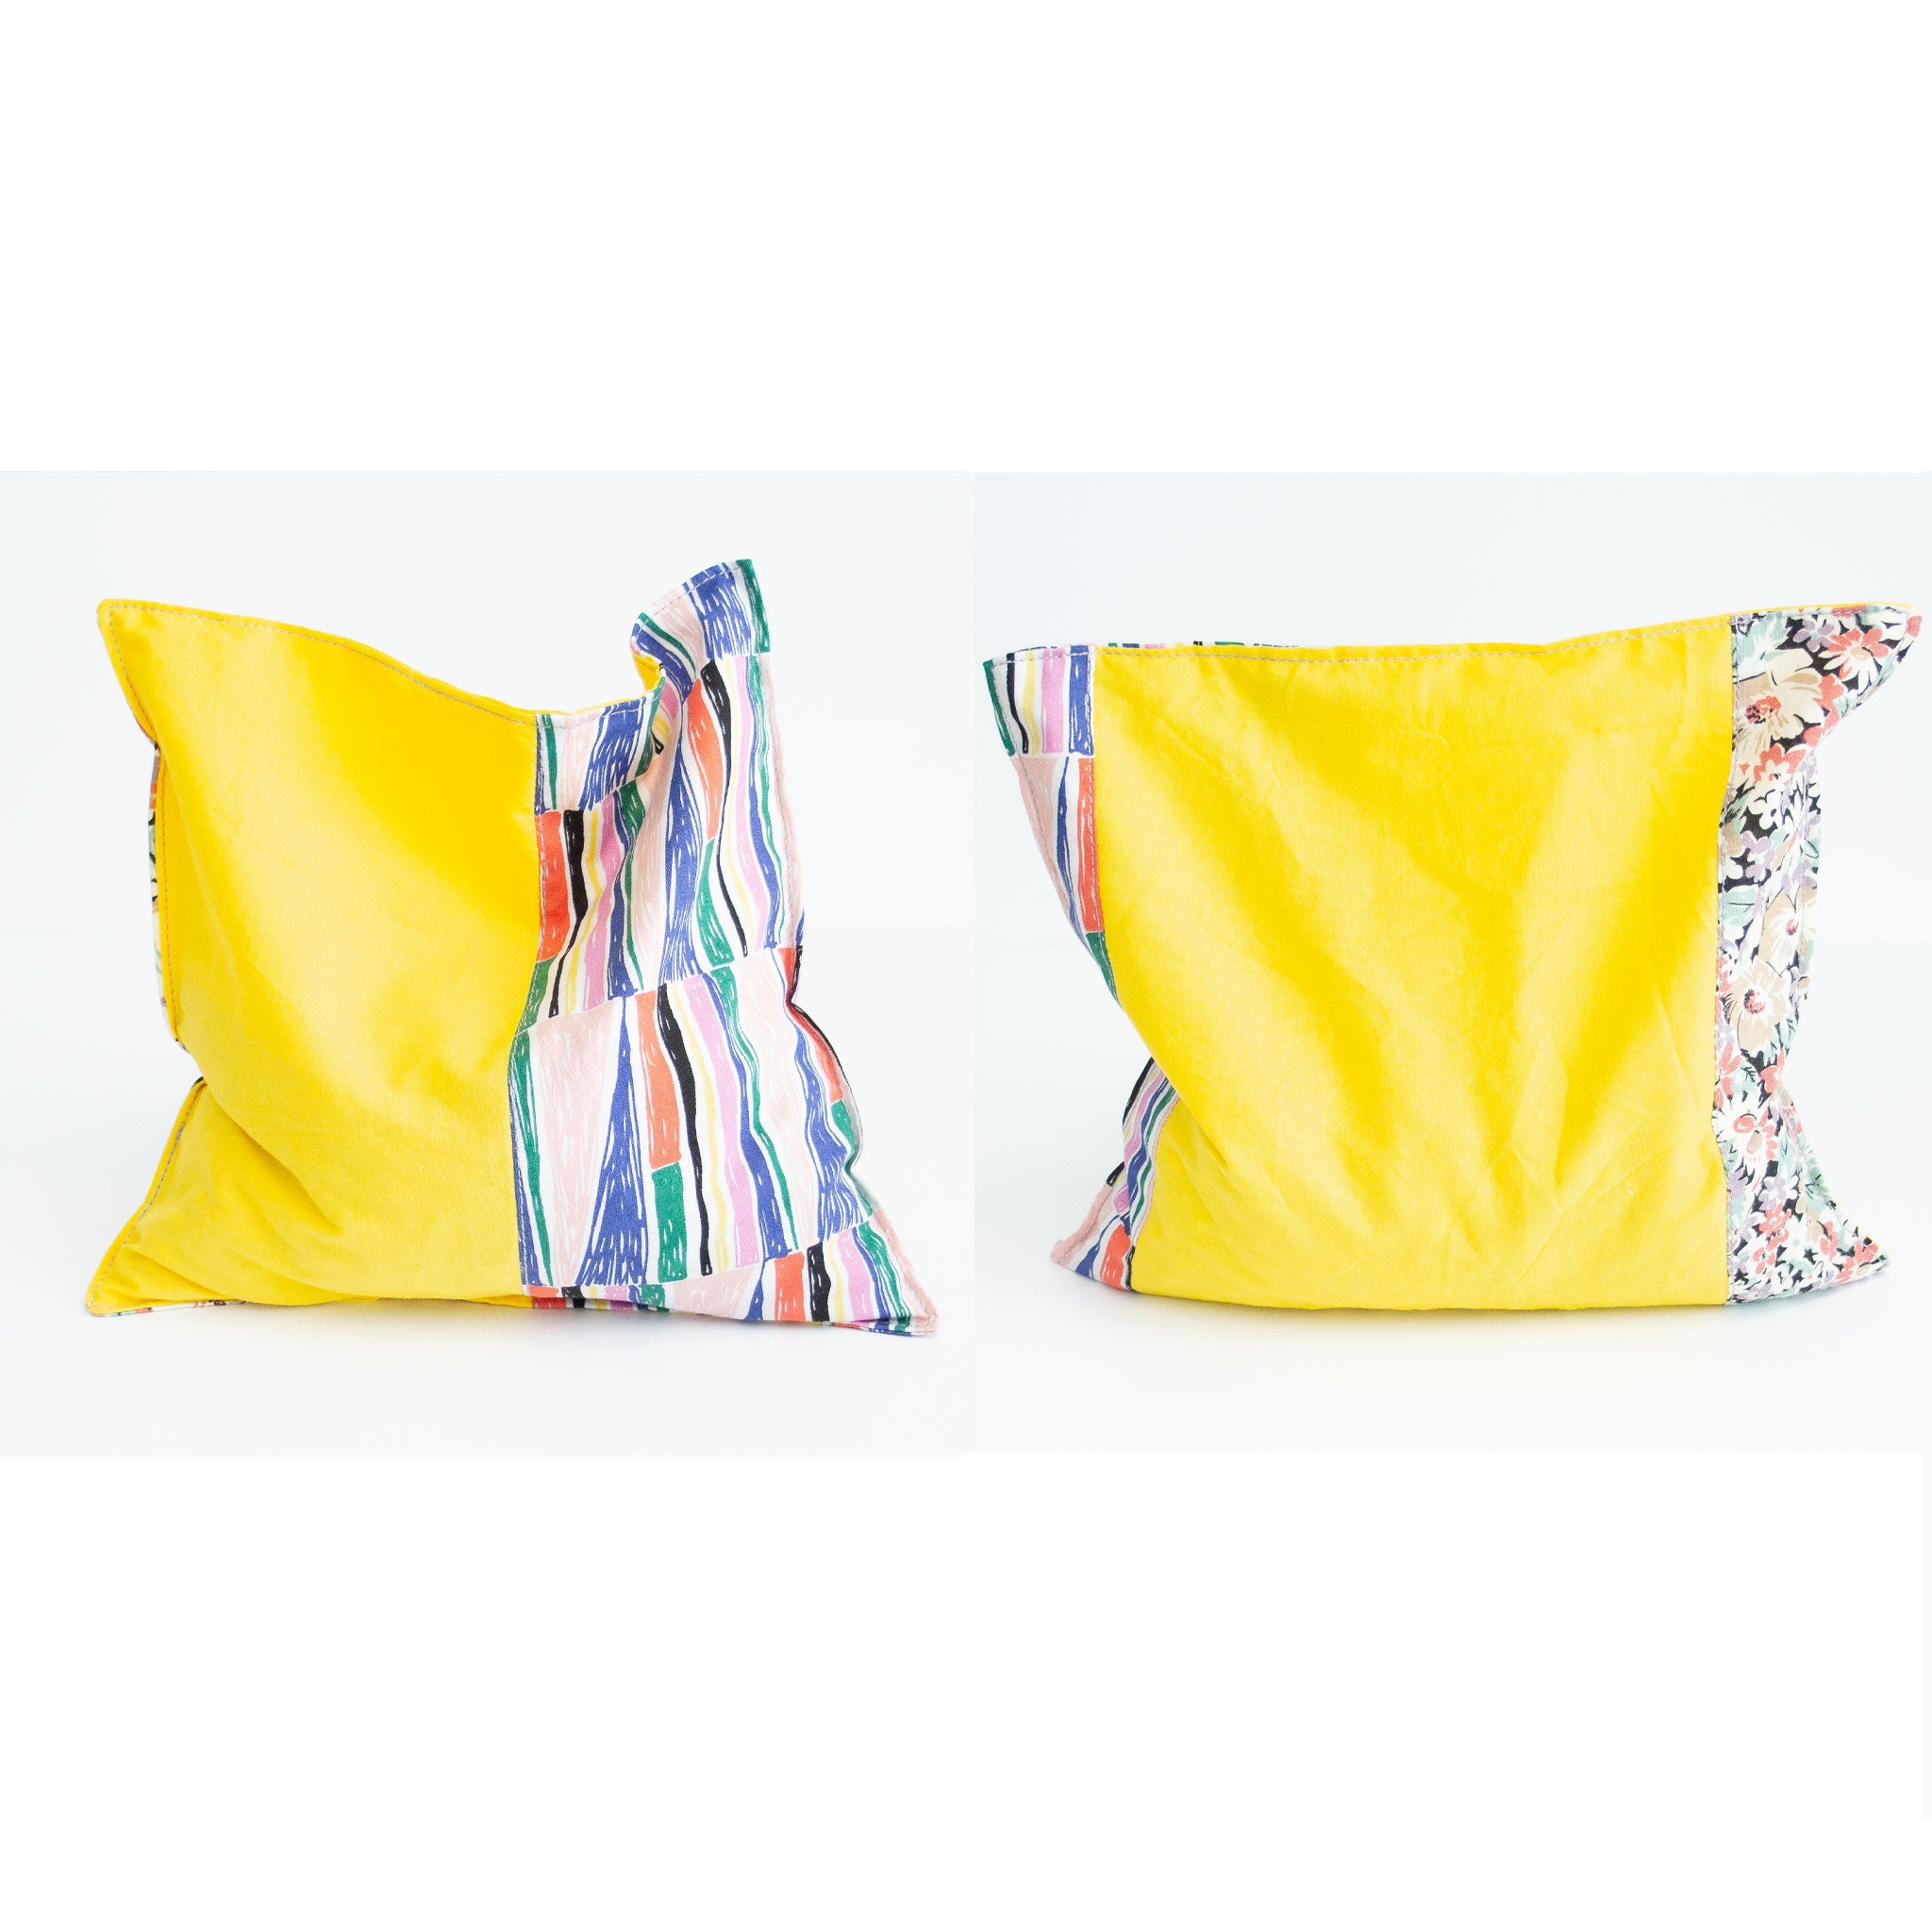 Two grain bags sit side by side showing front and back patchwork patterns. Front and back of patchwork (a mix of a floral print, a geometric print, and solid yellow) rectangle cherry pit grain bag. Sit on white background.